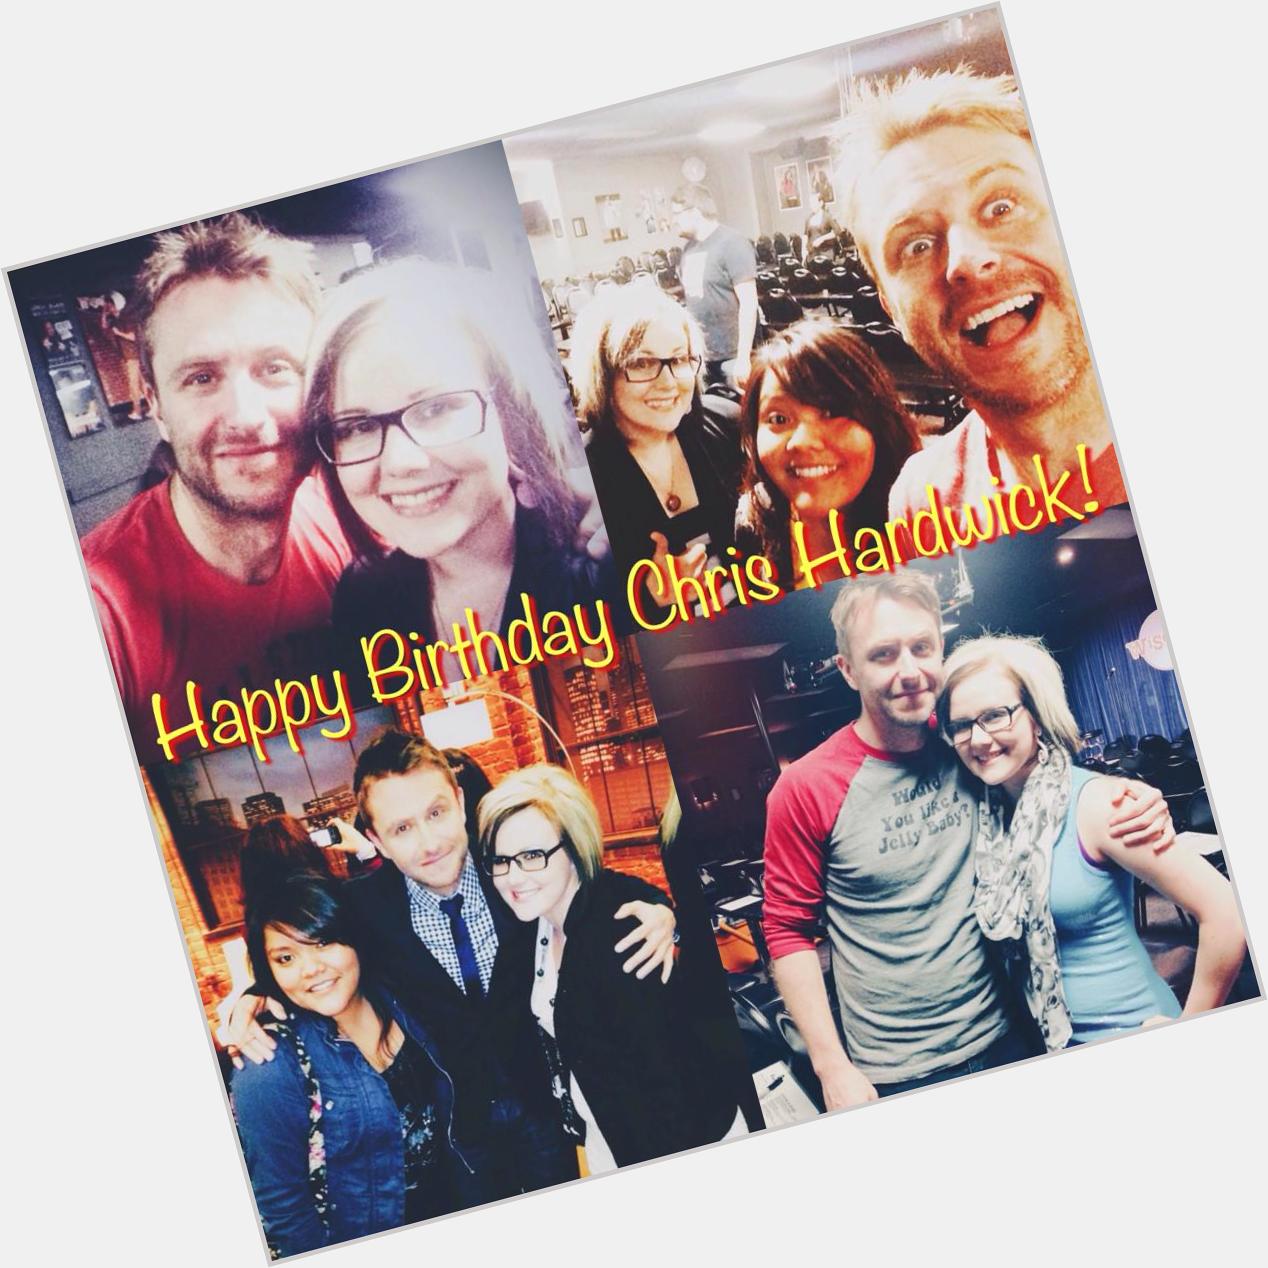 HAPPY BIRTHDAY CHRIS HARDWICK!!!! Its officially the 23rd here so I can say it!!!!     !!!!!  